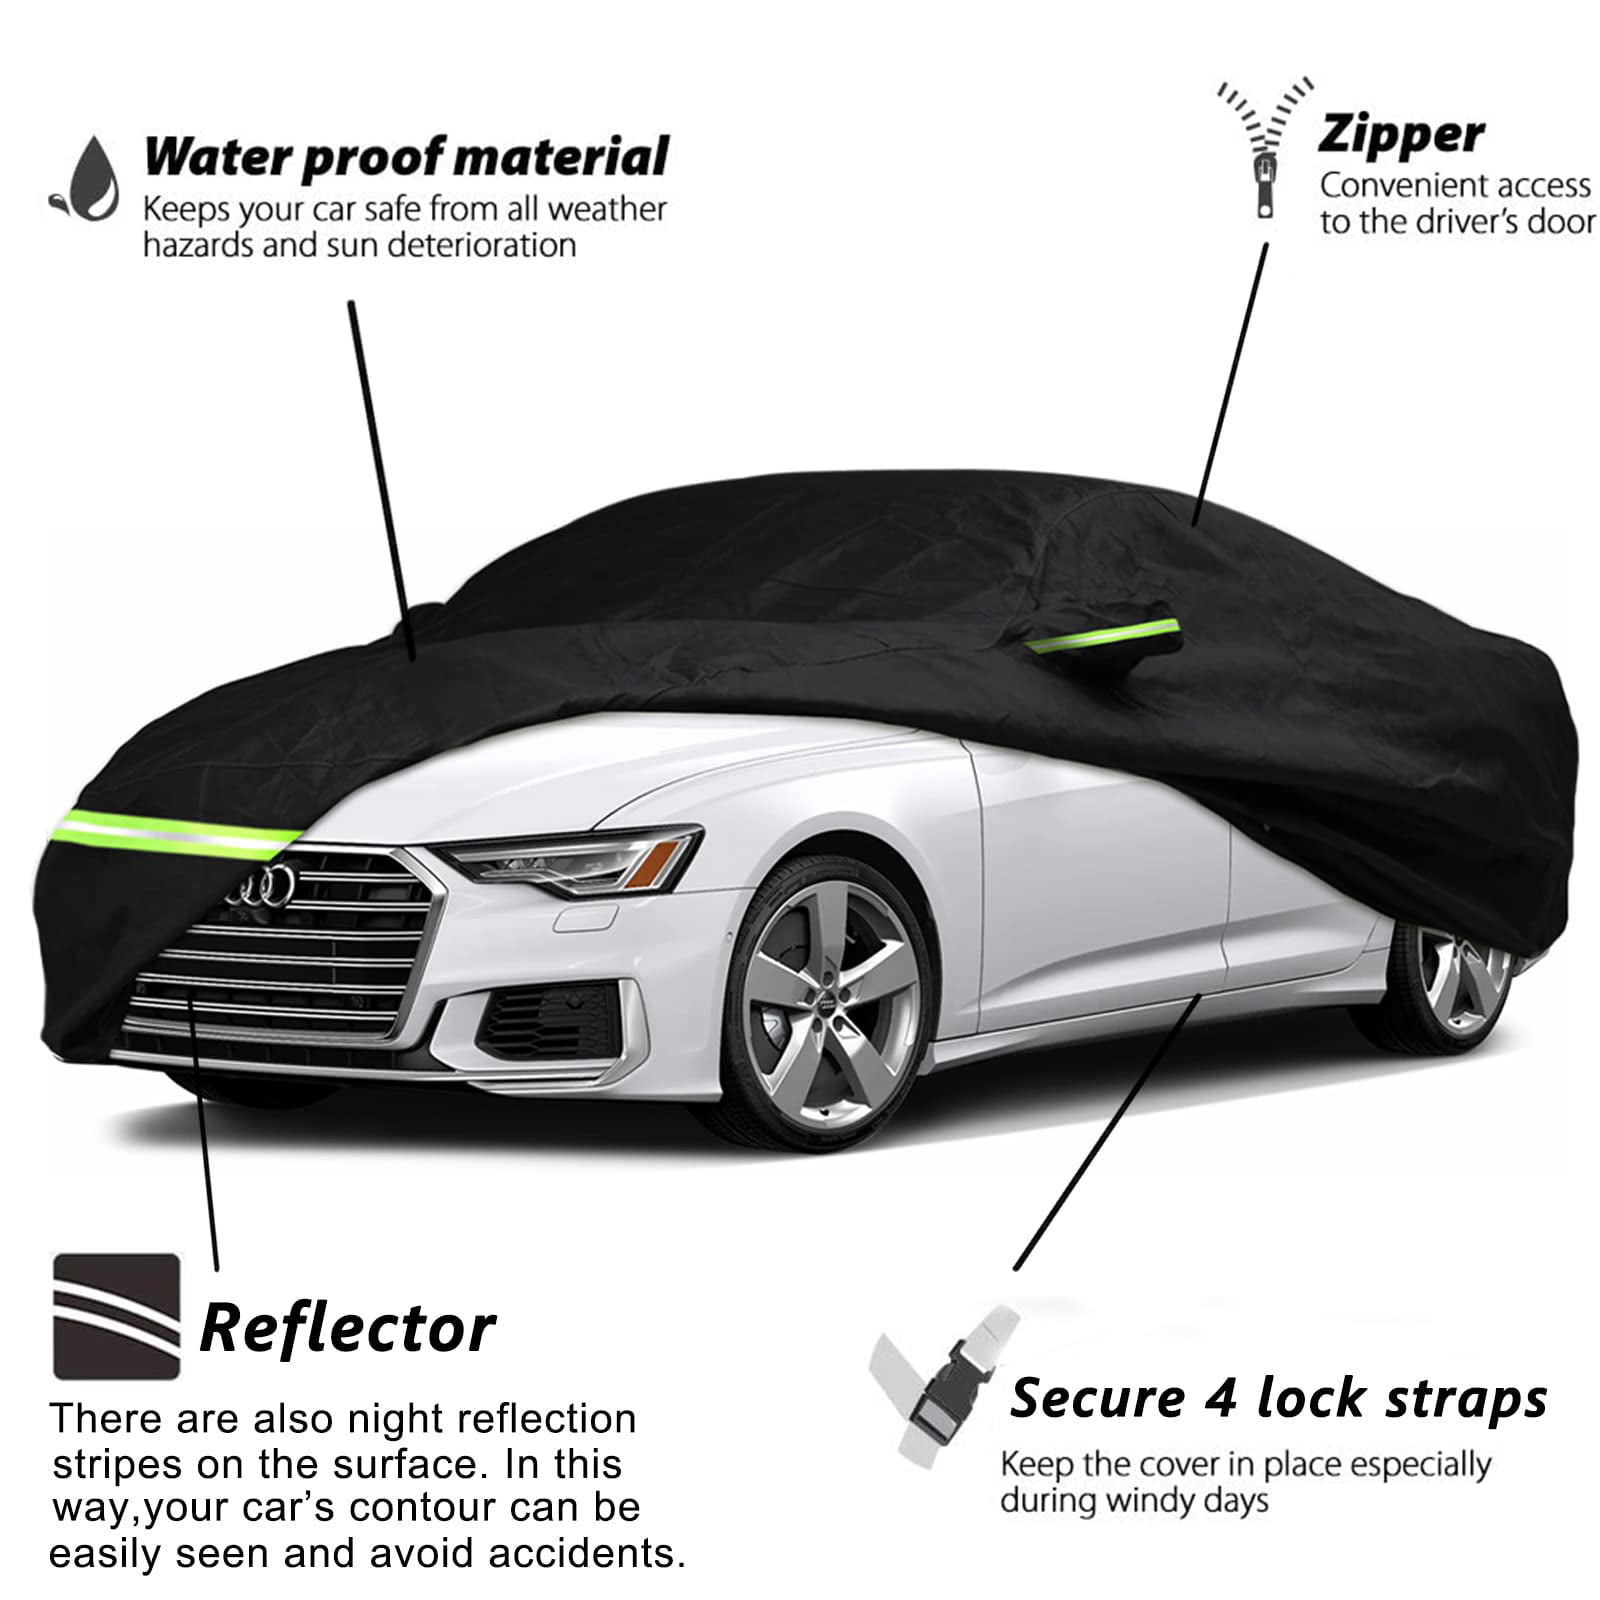 YIXIN Waterproof 210T Car Covers for 2005-2022 Audi Q7 SUV，Fit 100%  Waterproof with Windproof Strap & Single Door Zipper (for 2005-2022 Audi Q7  SUV) 